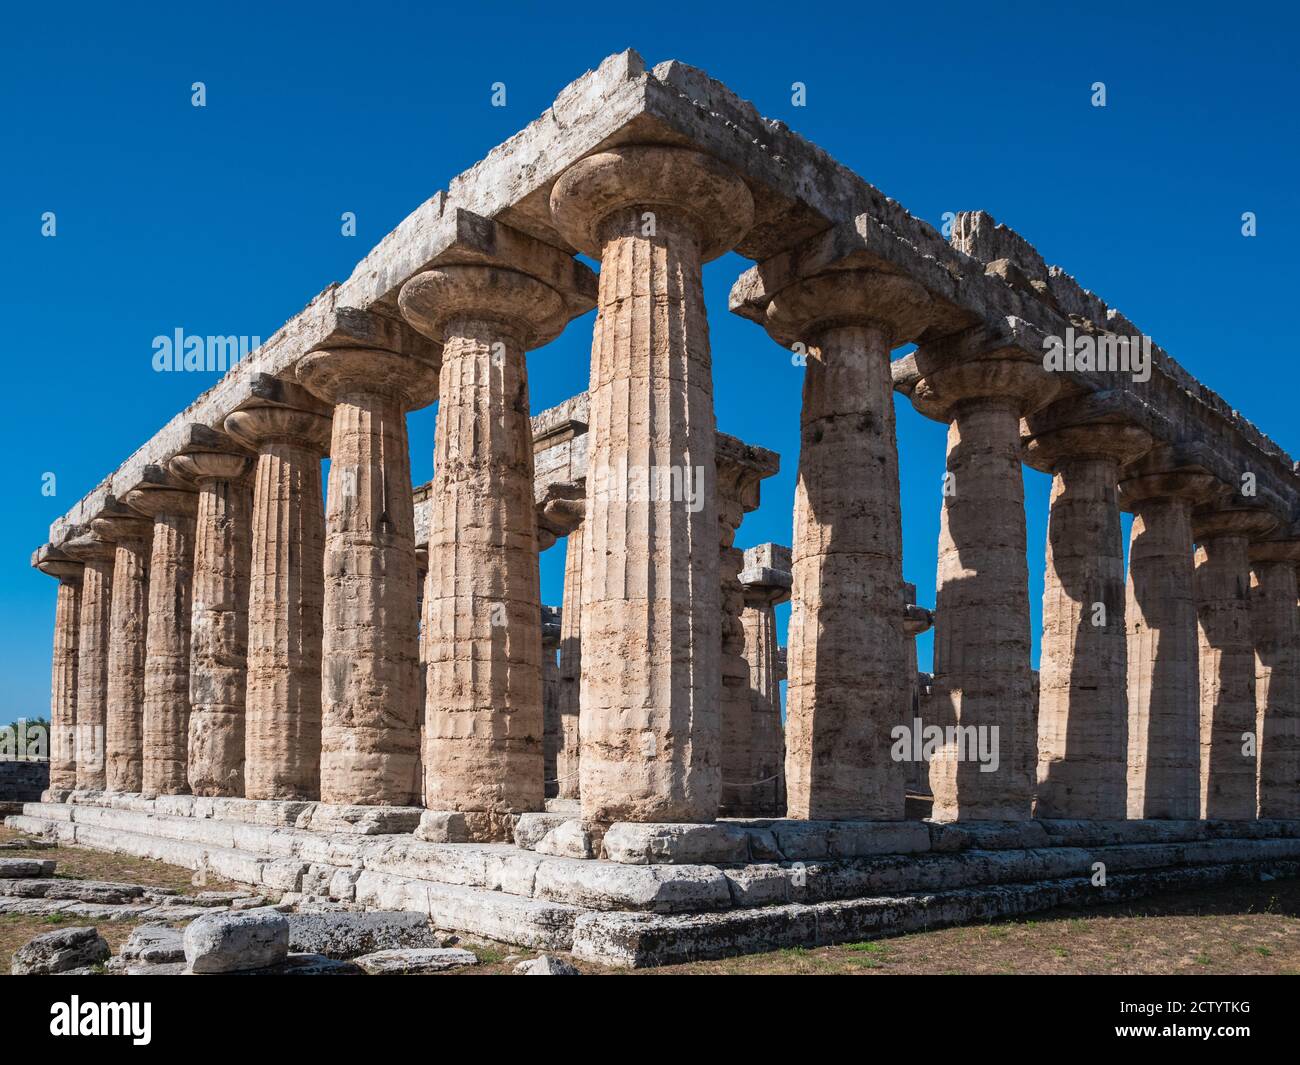 Archaic Temple or First Temple of Hera in Paestum, Italy also called Basilica, an Ancient Greek Temple Ruin with Doric Columns Stock Photo